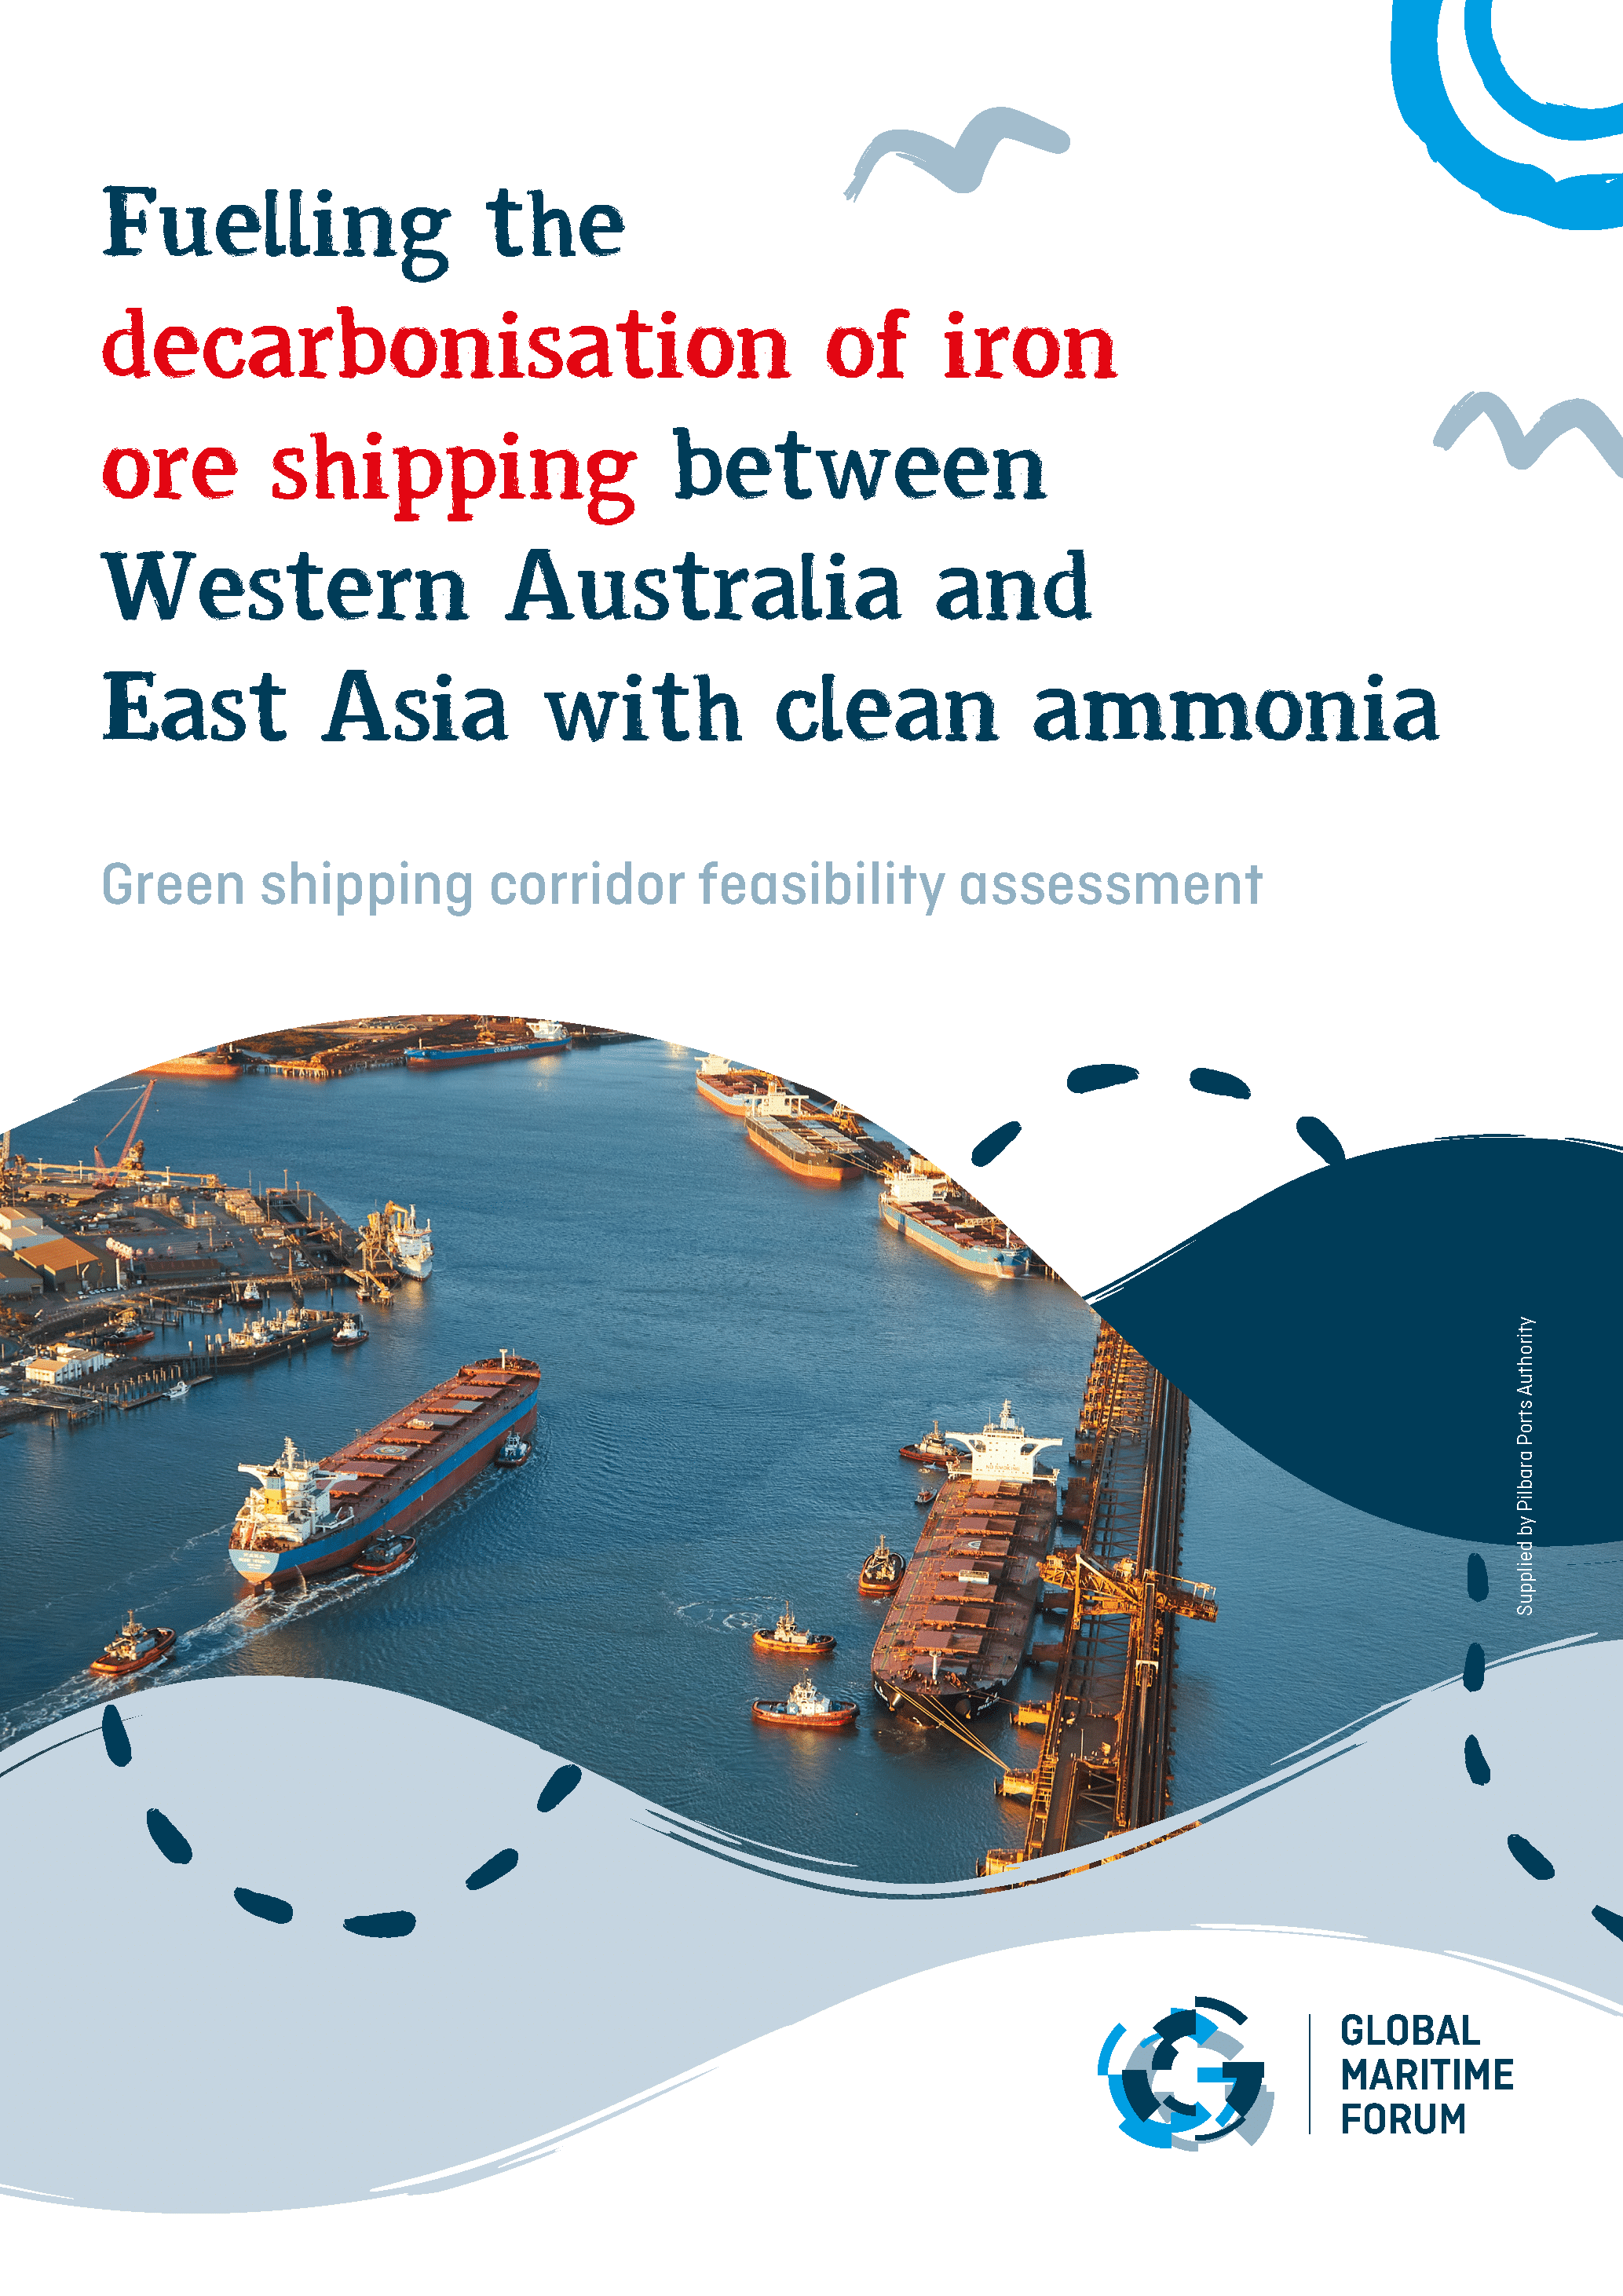 Report Fuelling the decarbonisation of iron ore shipping between Western Australia and East Asia with clean ammonia